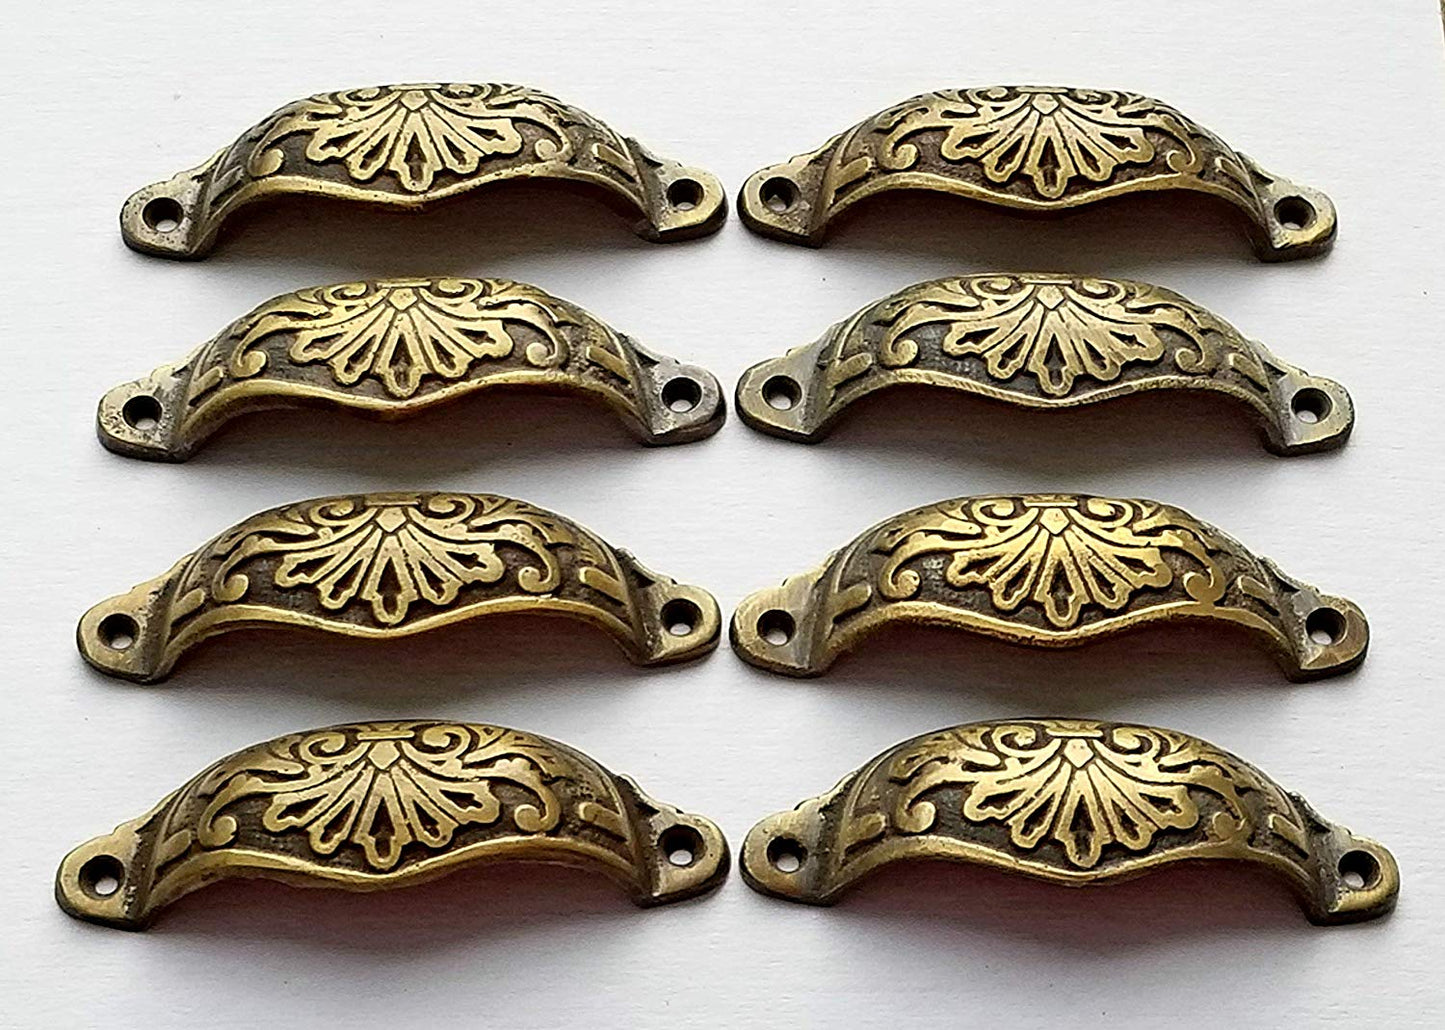 8 Ornate Apothecary Cabinet Drawer Cup Pull Handles Victorian Style 4 1/8" #A1